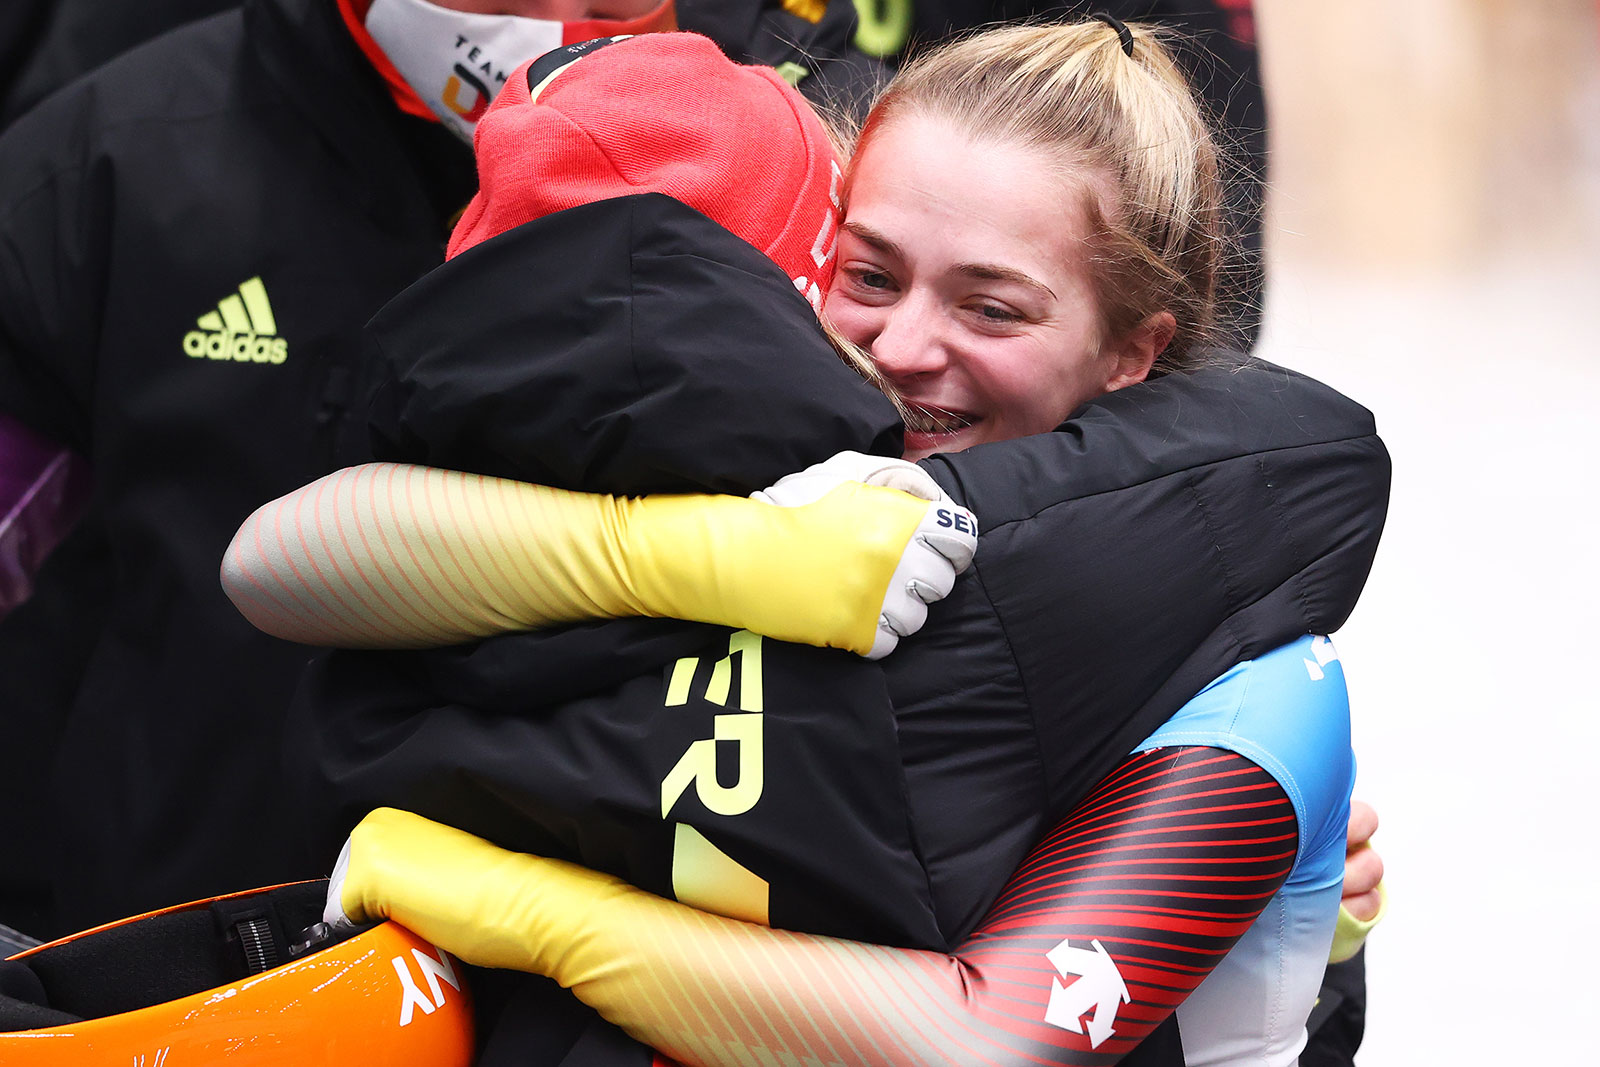 Germany's Hannah Neise celebrates after capturing the gold medal in the women's skeleton on February 12.